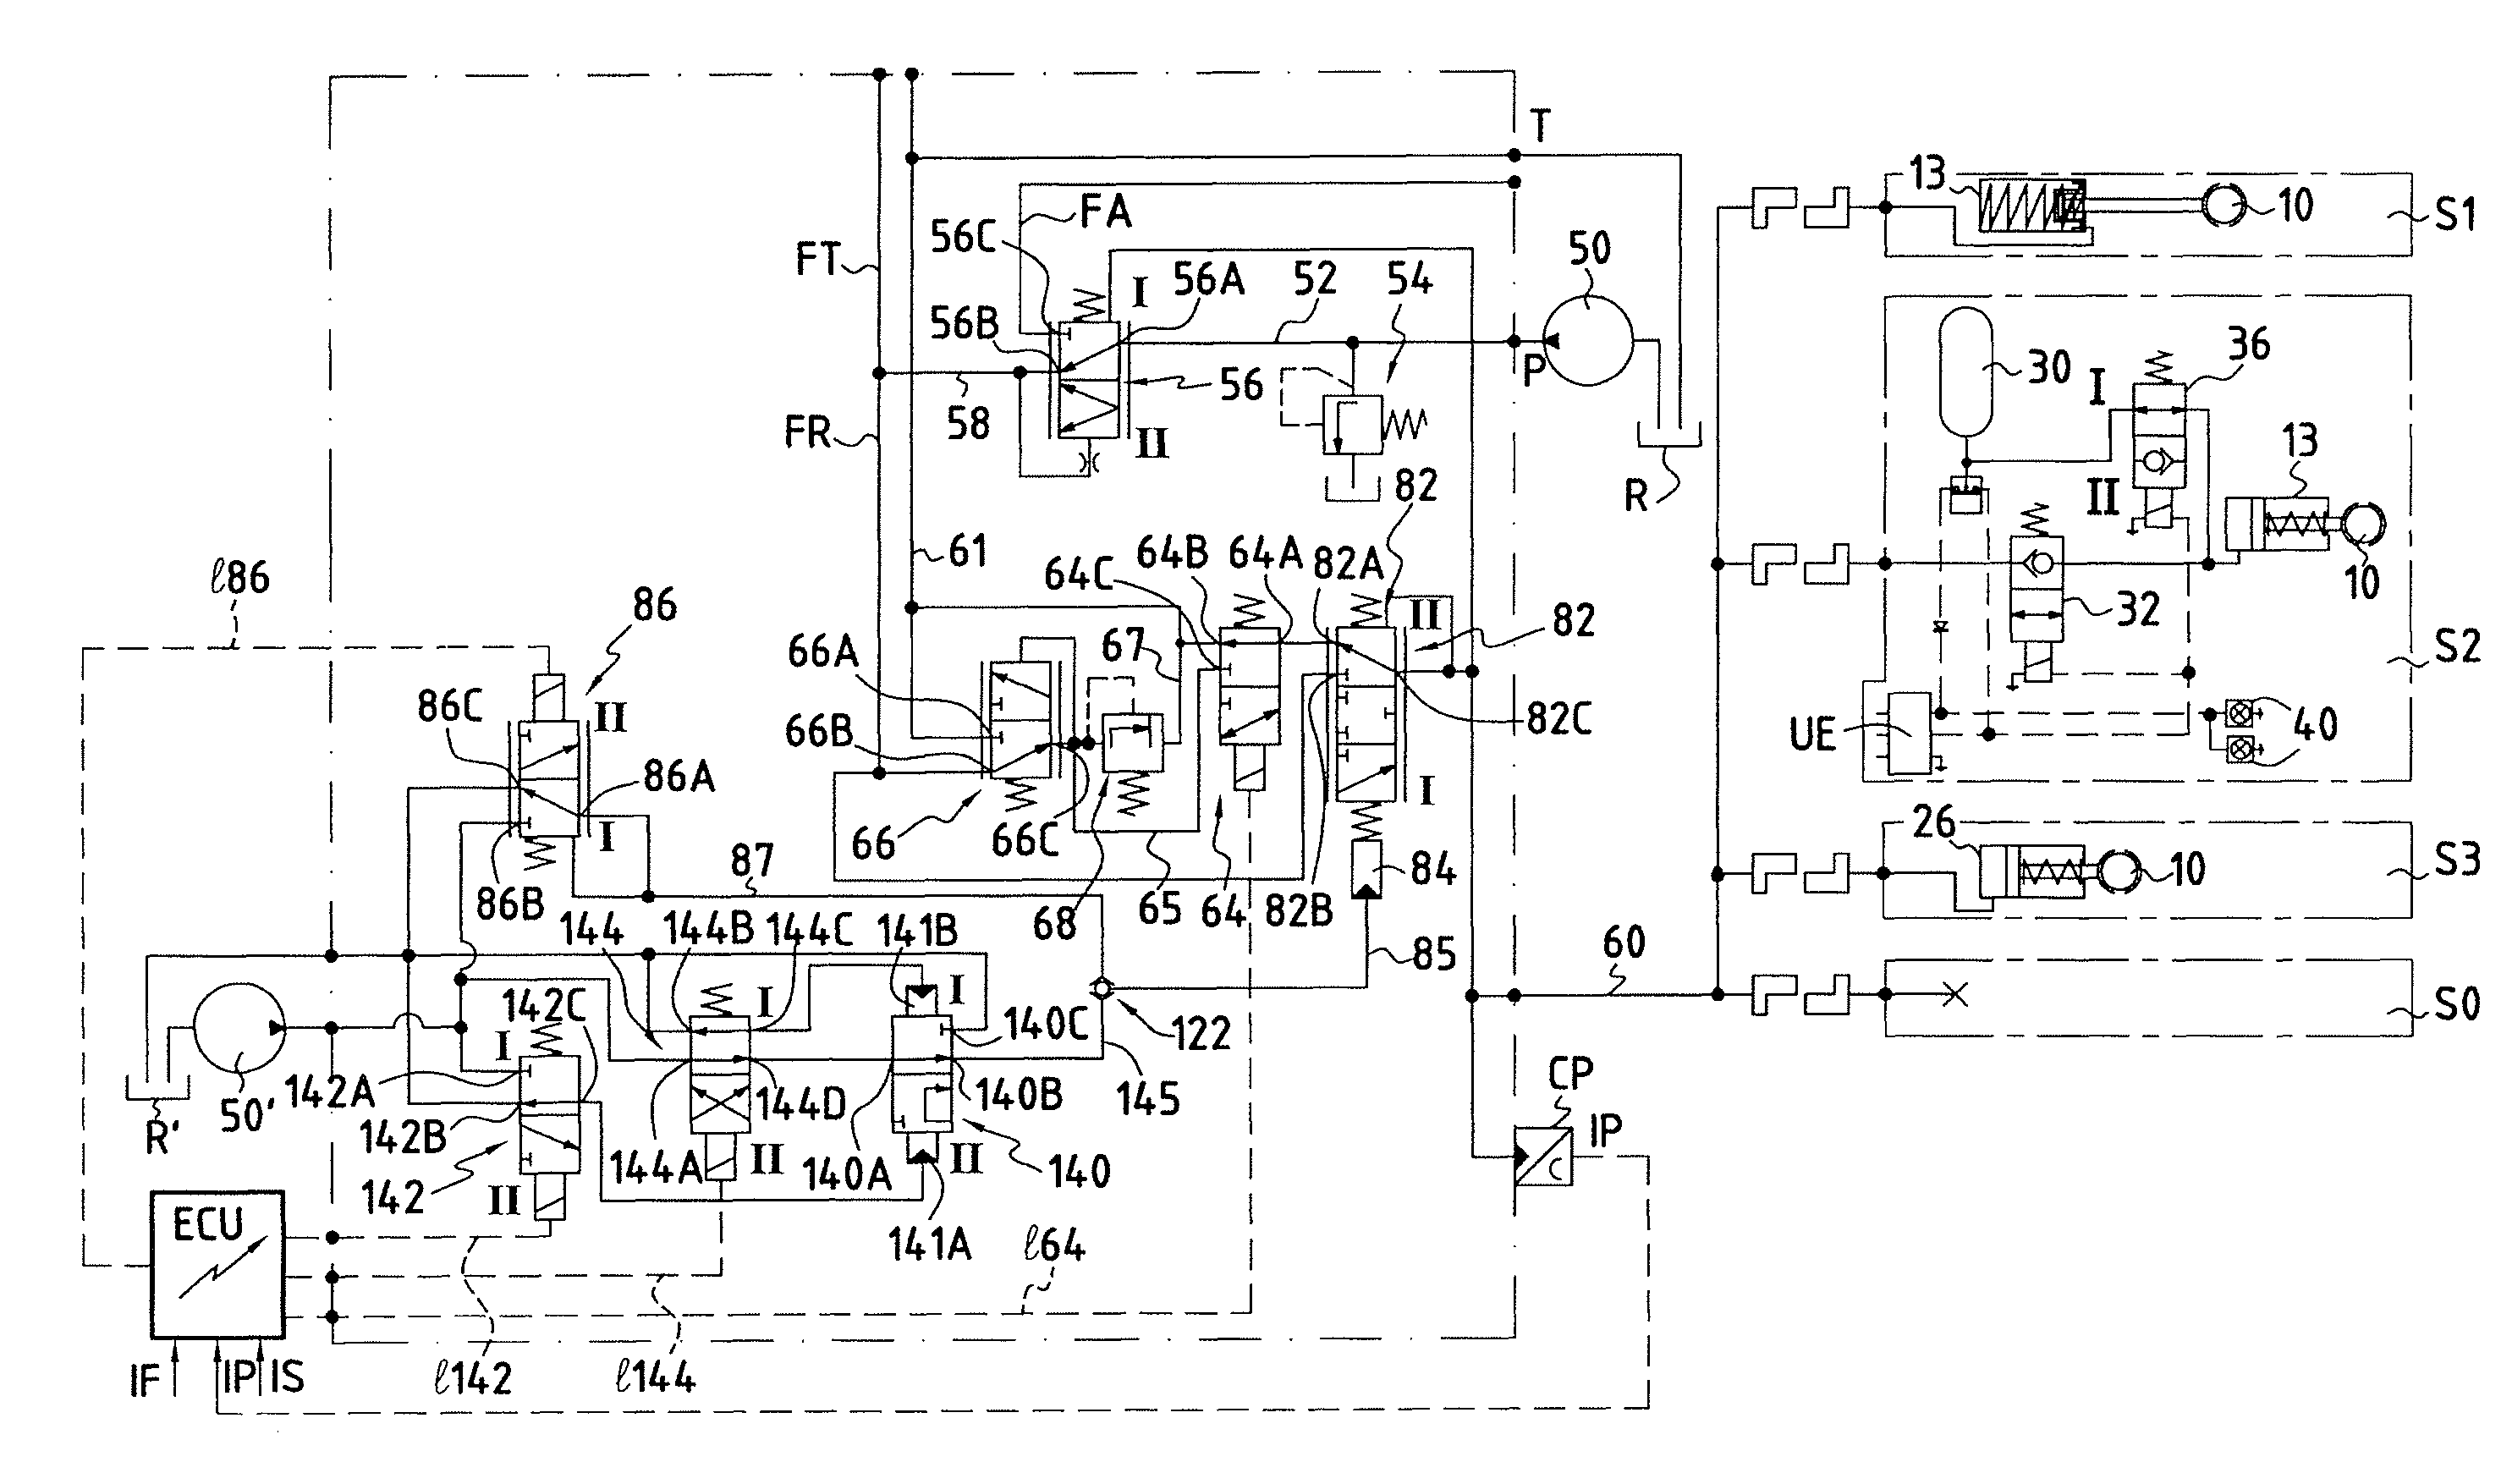 Device for controlling hydraulic braking of a trailer hitched to a tractor